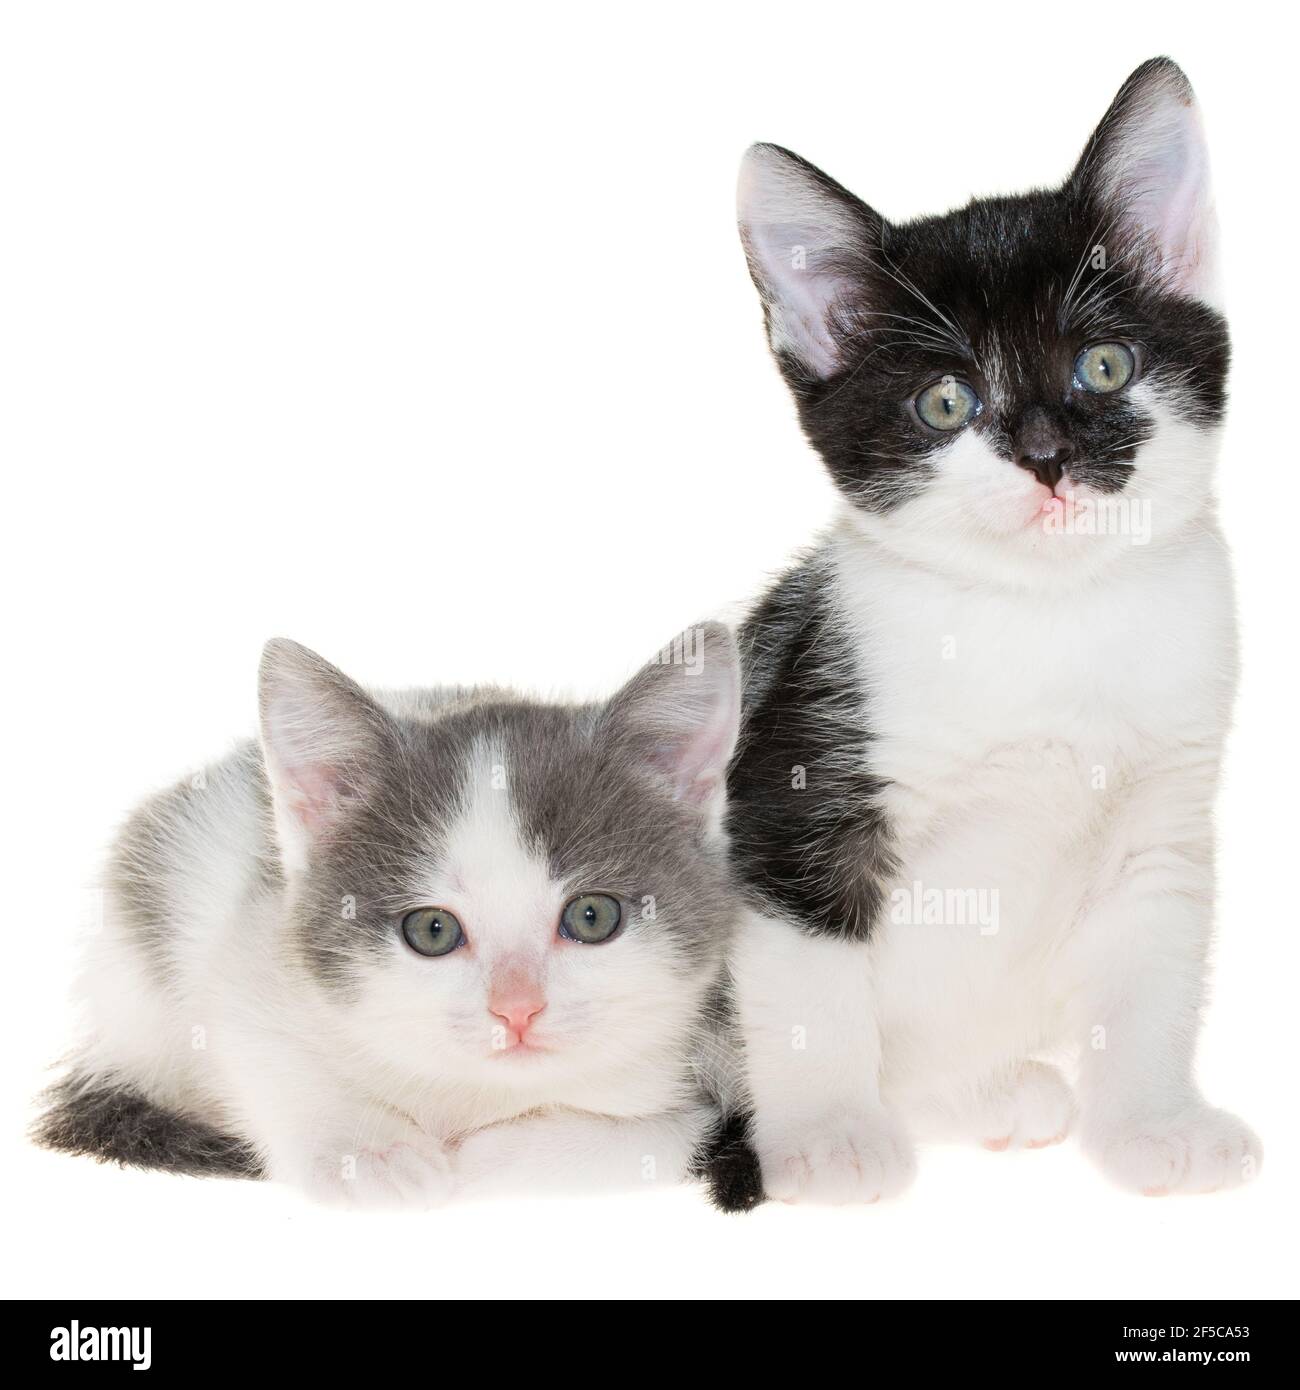 Bicolor two small shorthair kitten lie isolated on a white background. Stock Photo